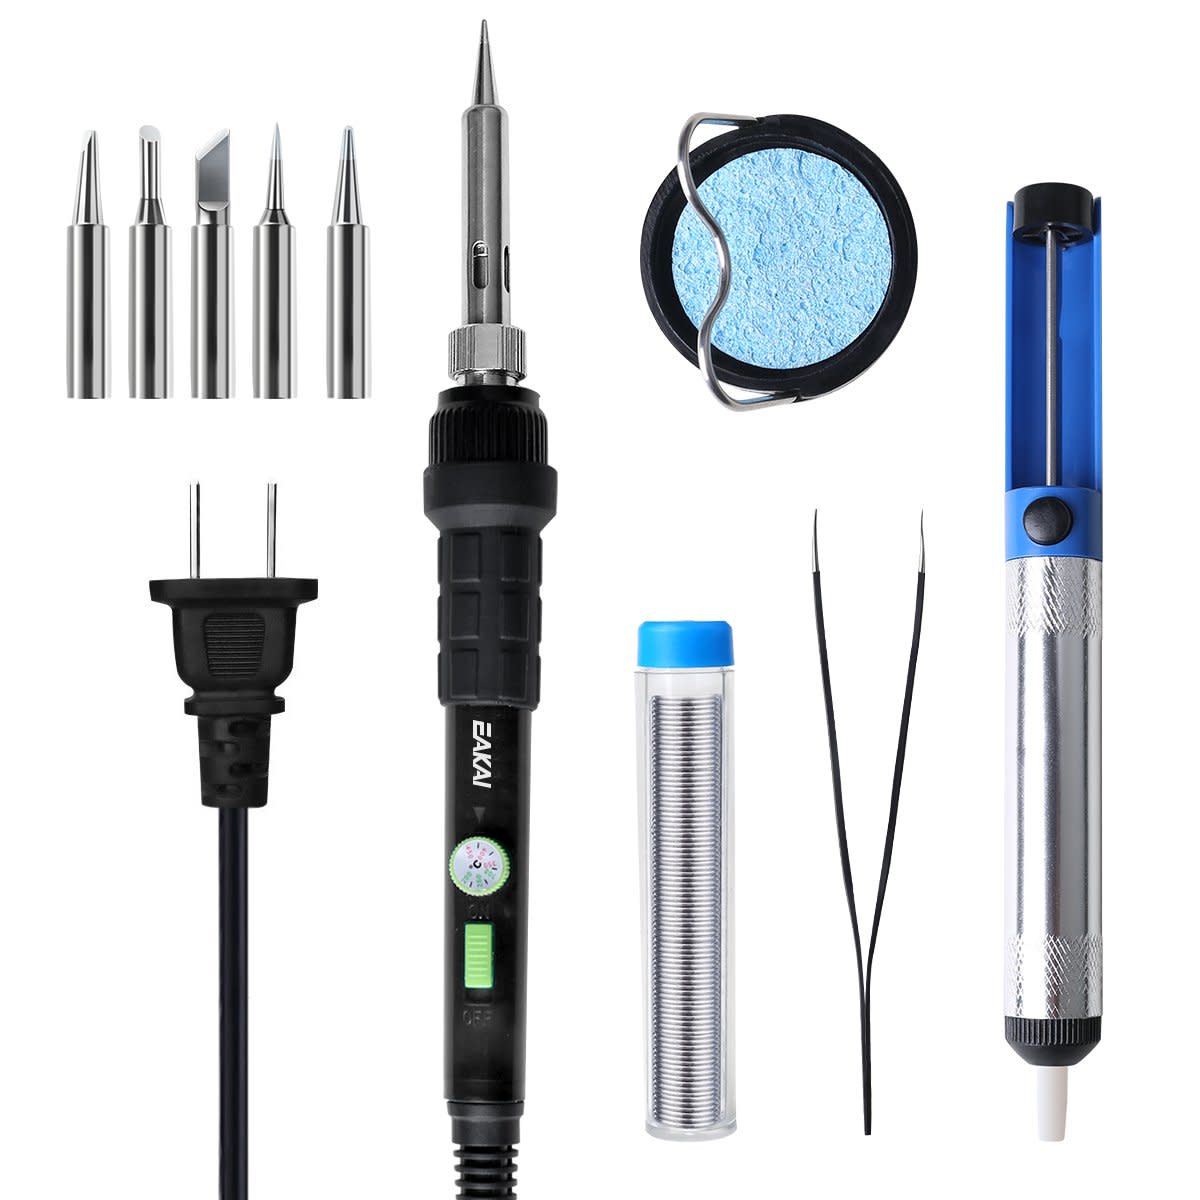  Soldering Iron Kit  7 in 1 Adjustable Temperature Upgraded 60W 110V w On Off